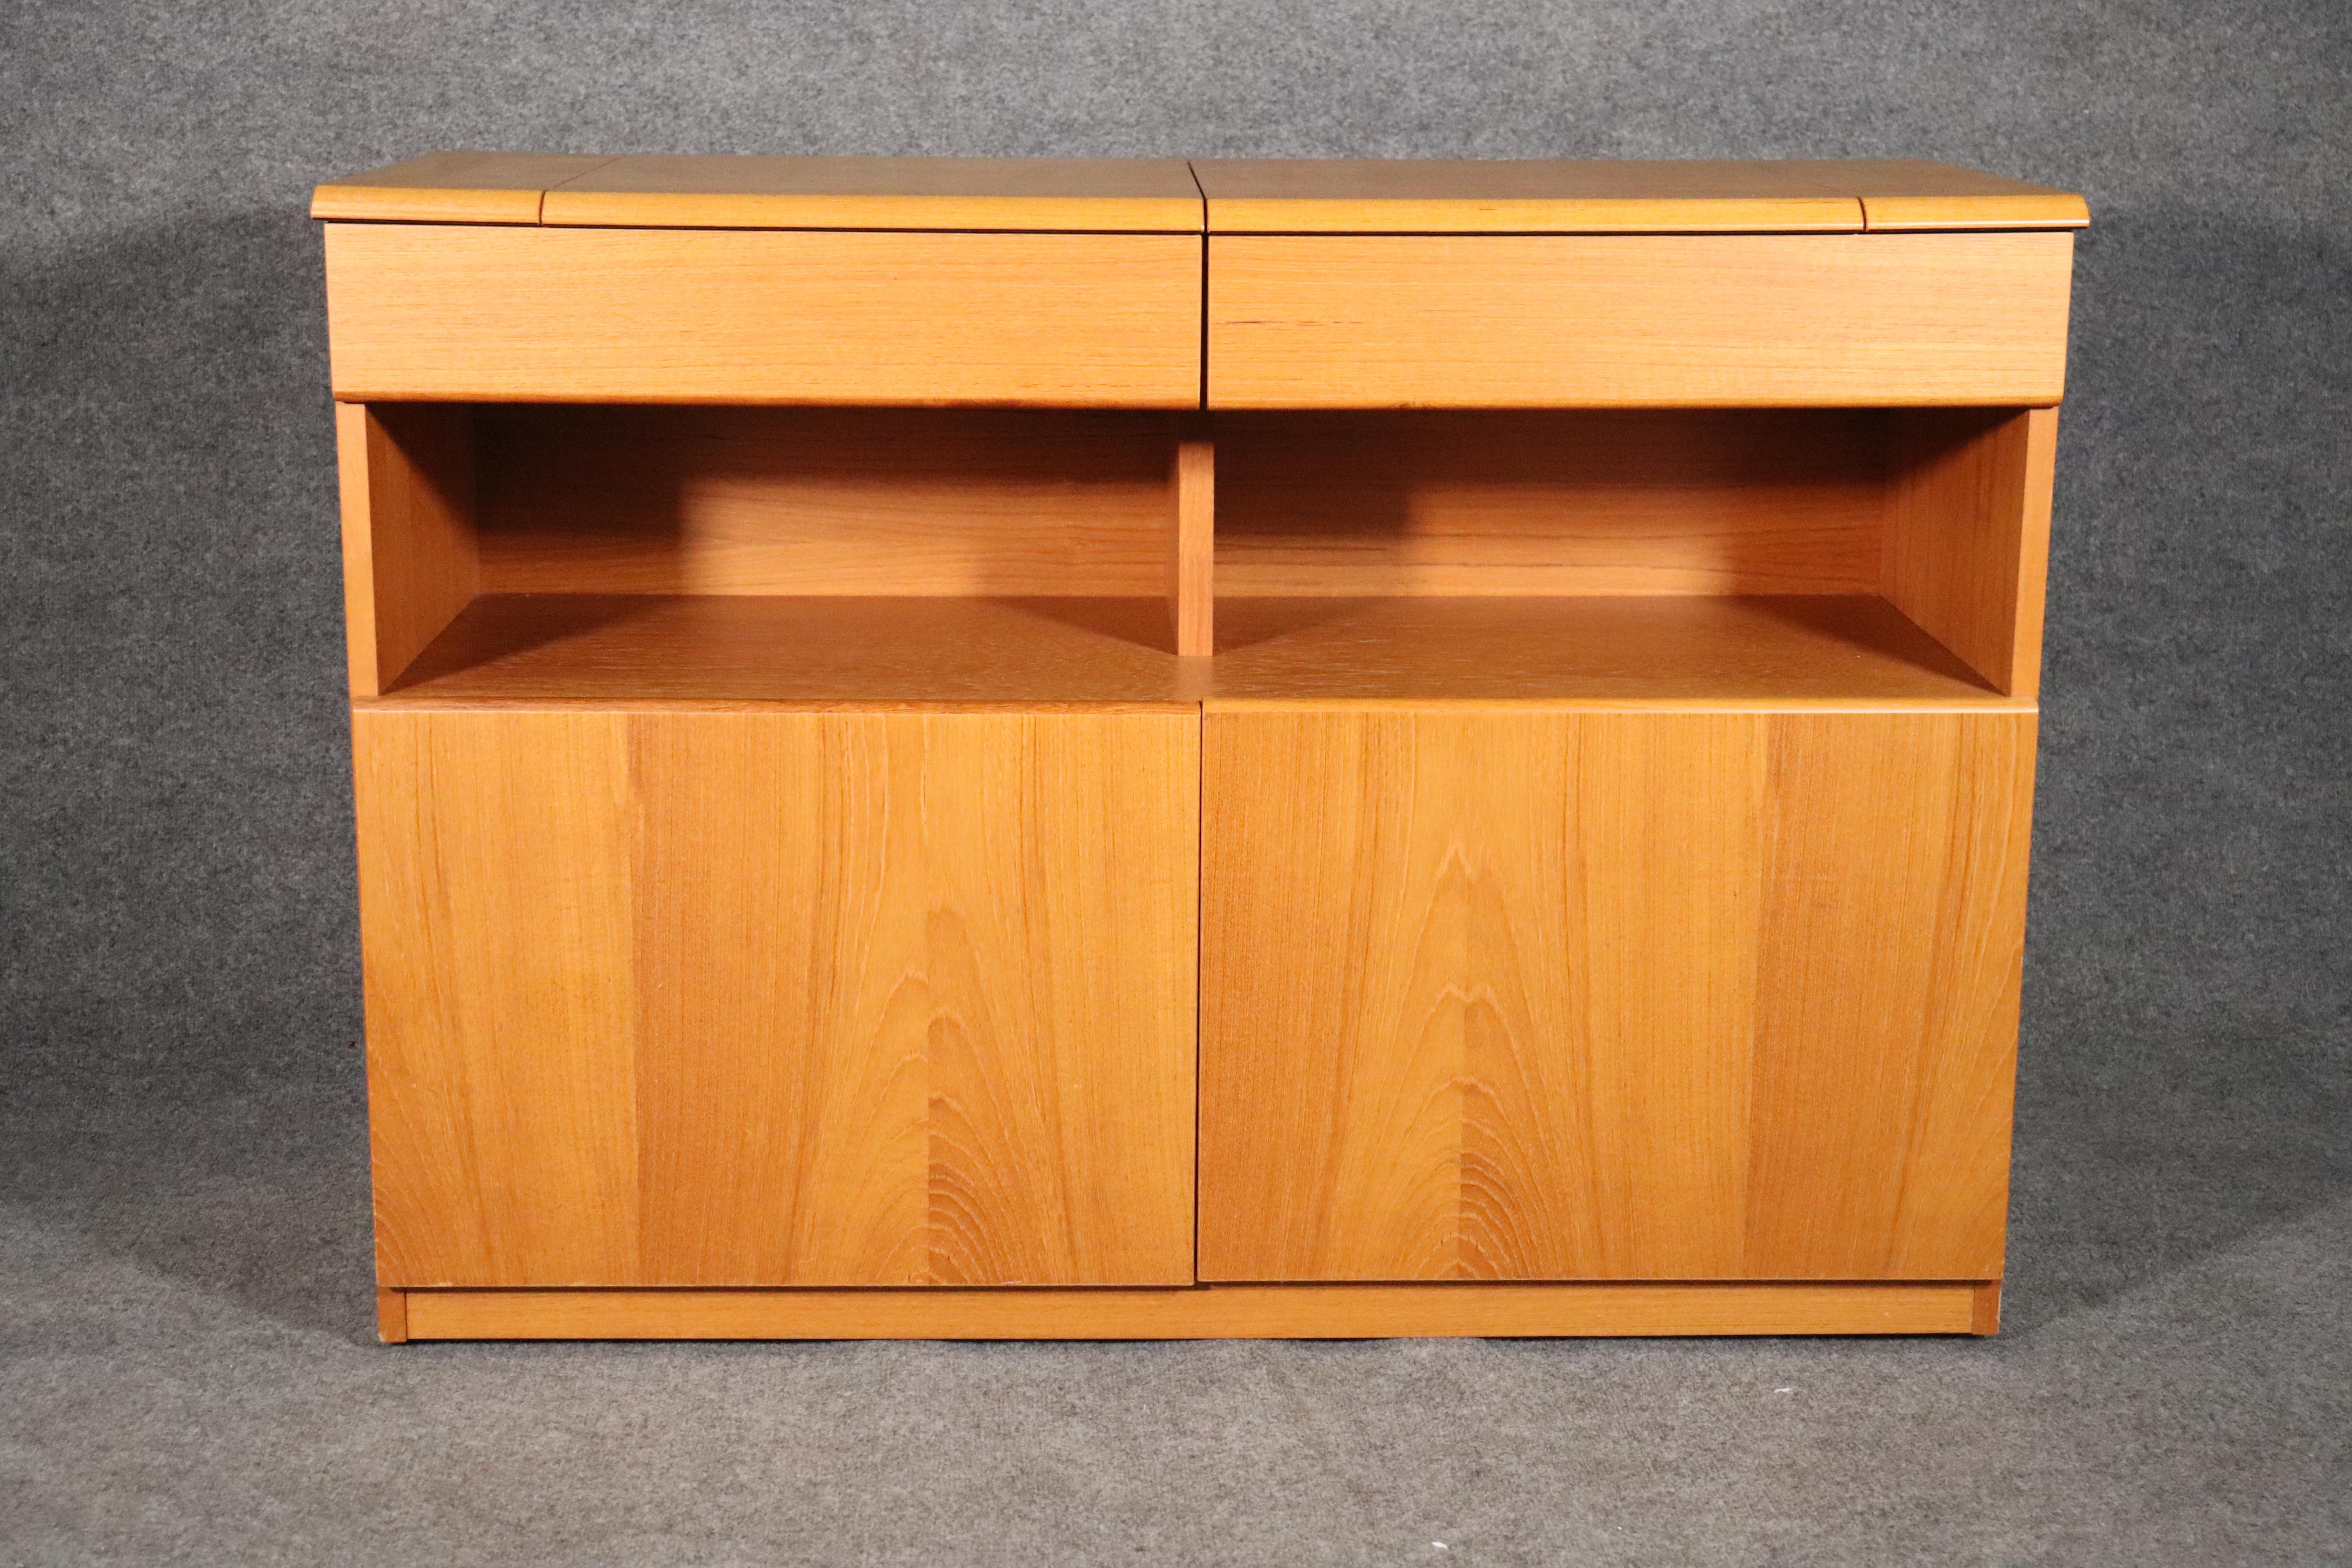 Teak Expanding Cabinet In Good Condition For Sale In Brooklyn, NY